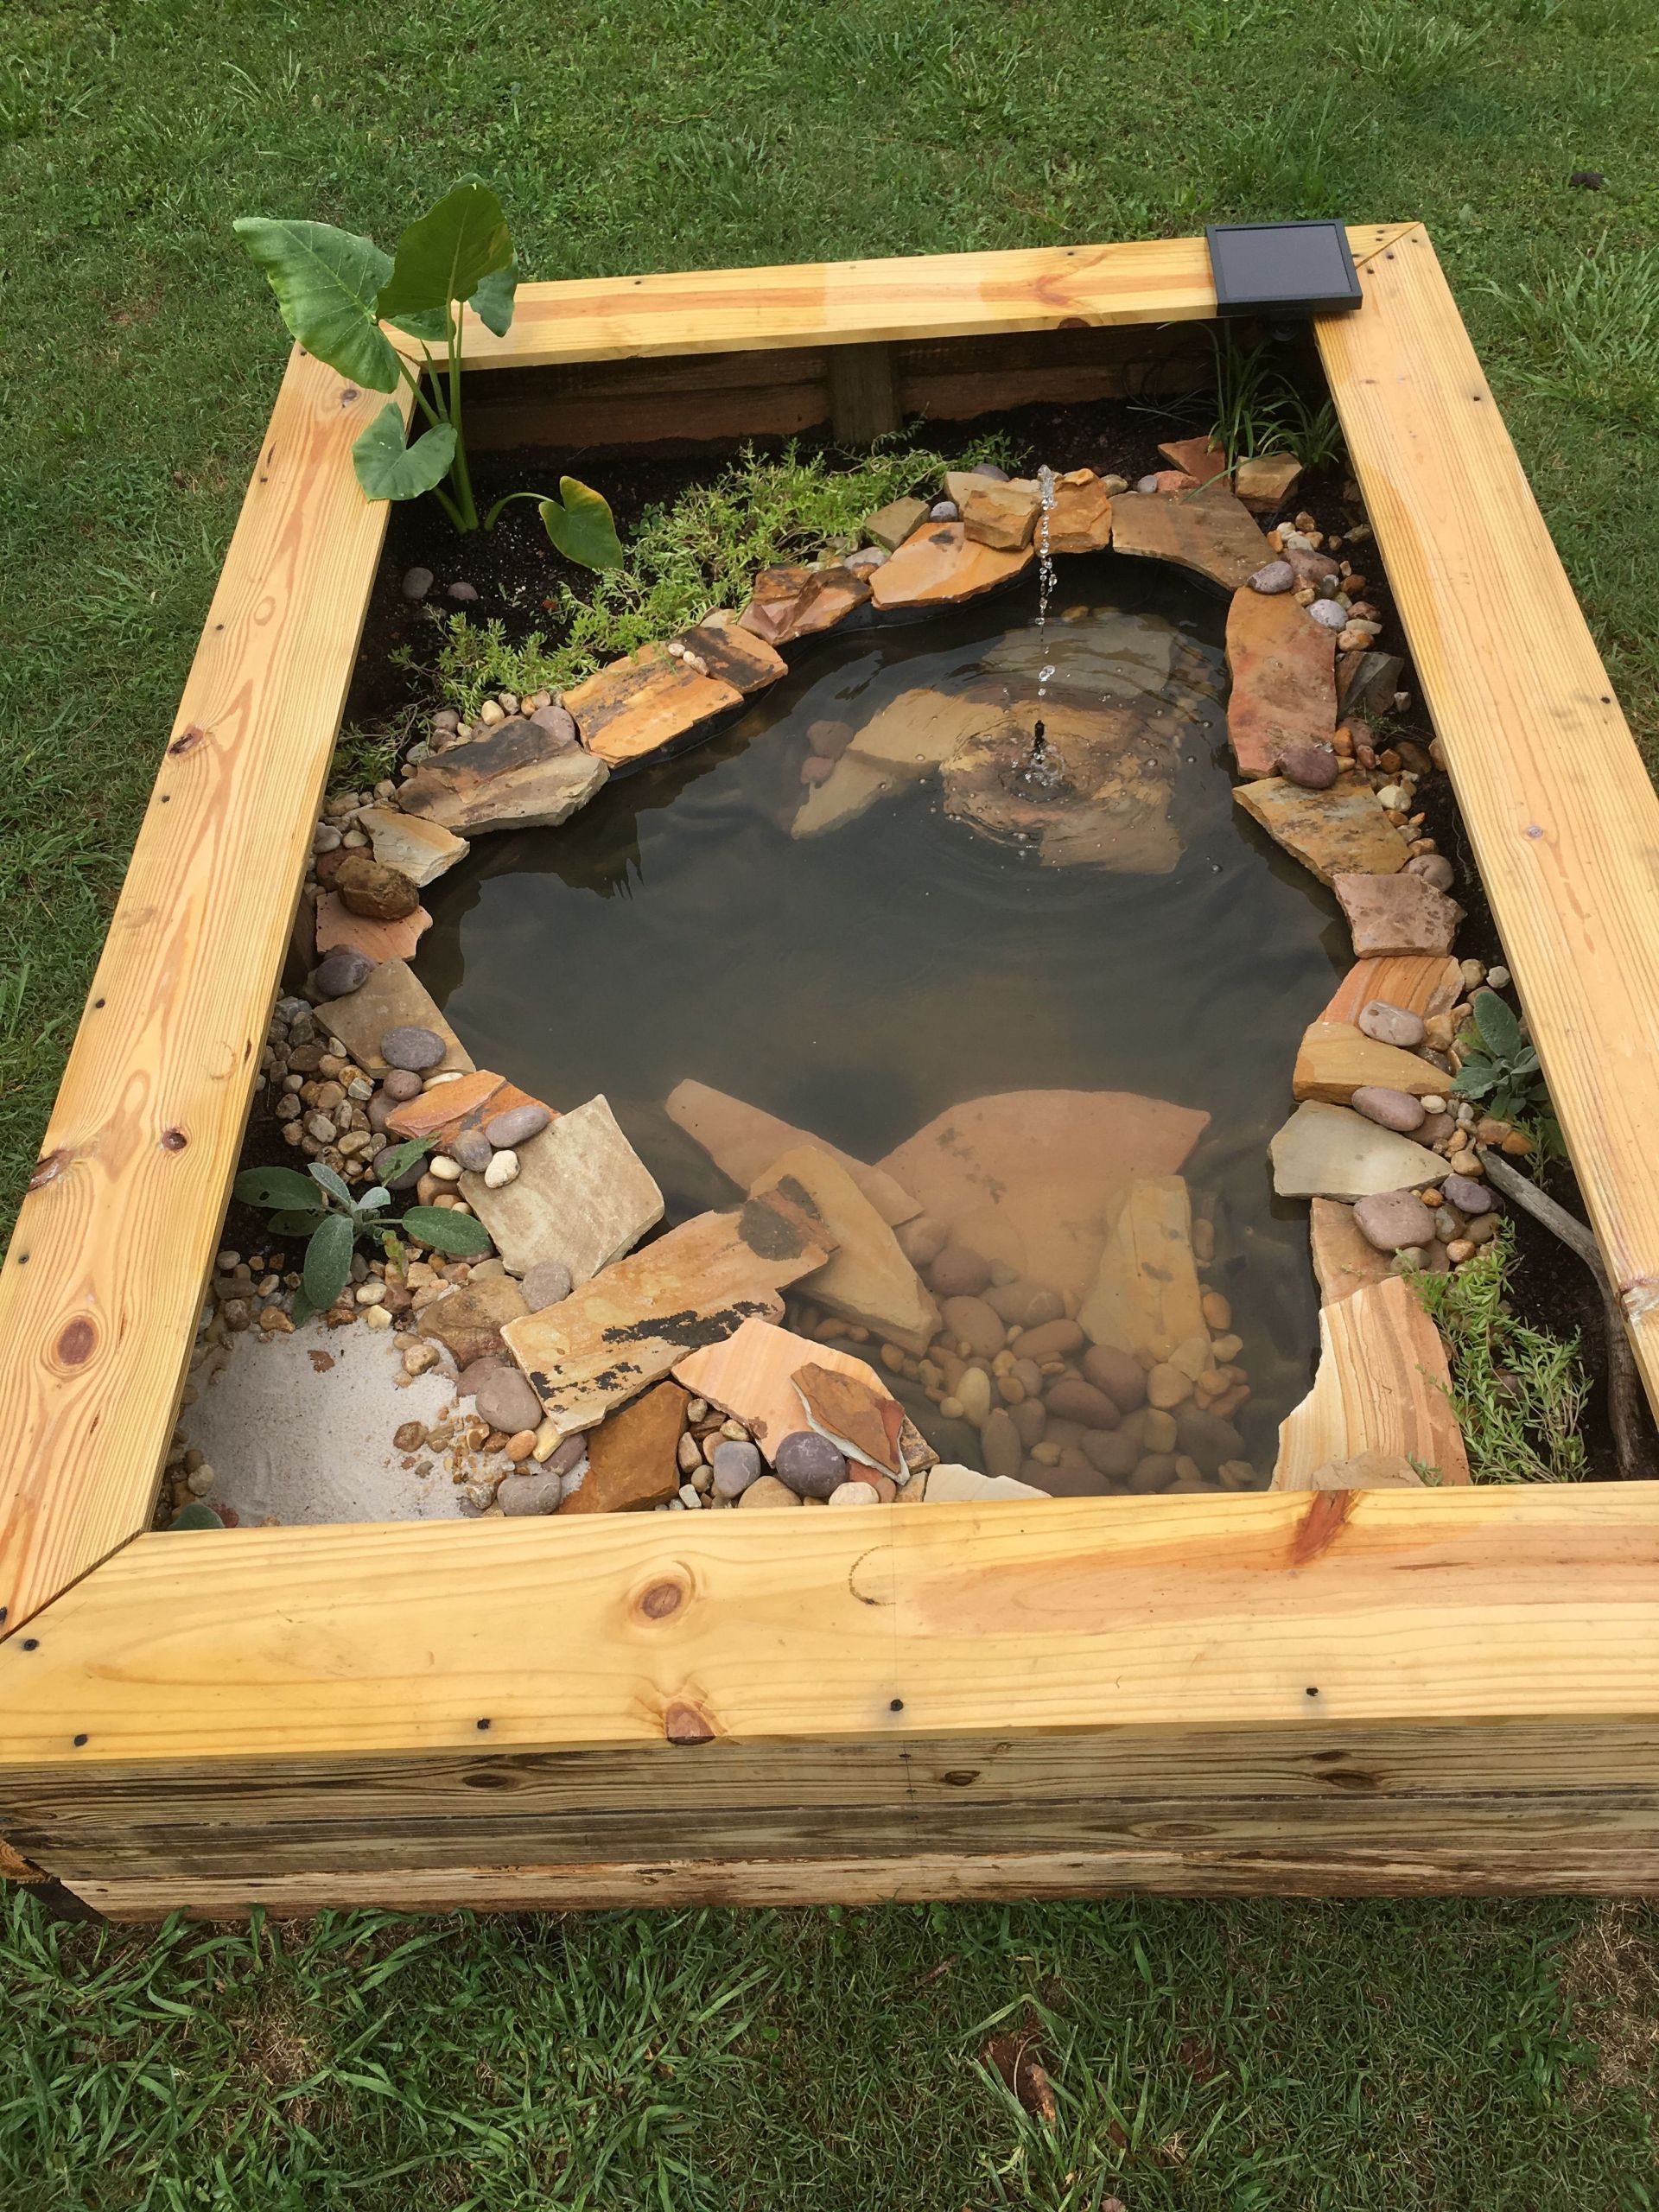 DIY Outdoor Turtle Pond
 Our new DIY above ground pond for Bella the turtle